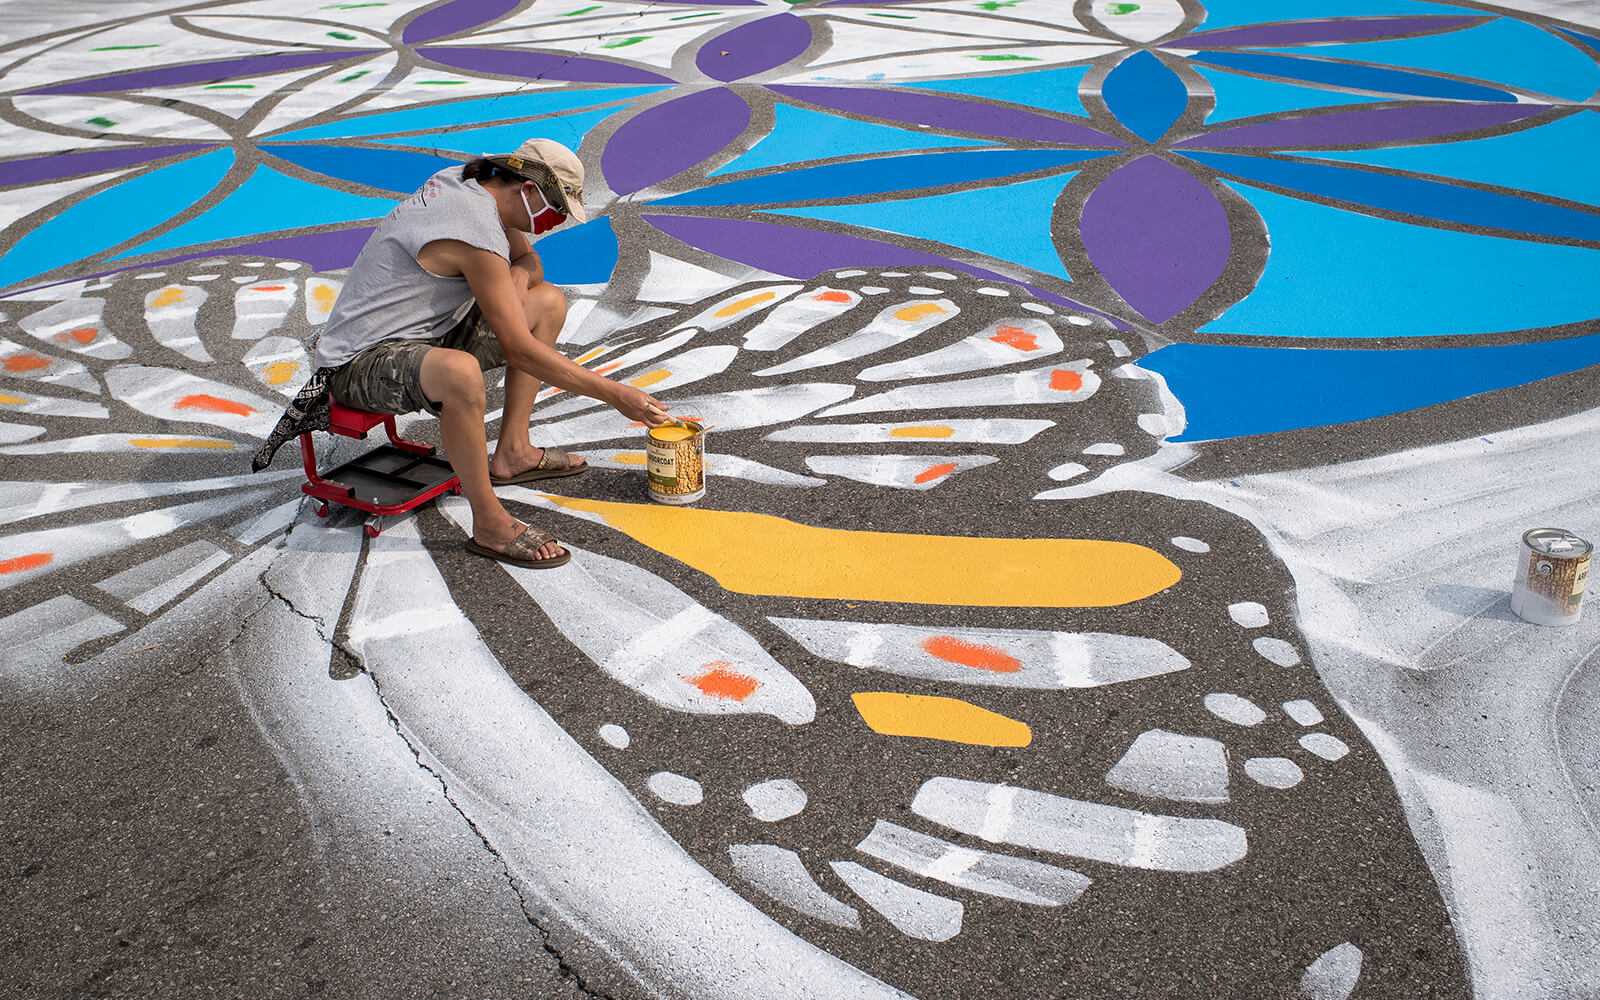 A man paints at the intersection of Ezra Rust Avenue and Fordney Street during the Great Mural Project Asphalt Mural Paint-A-Thon on Sept. 26, 2020 in Saginaw, Michigan.